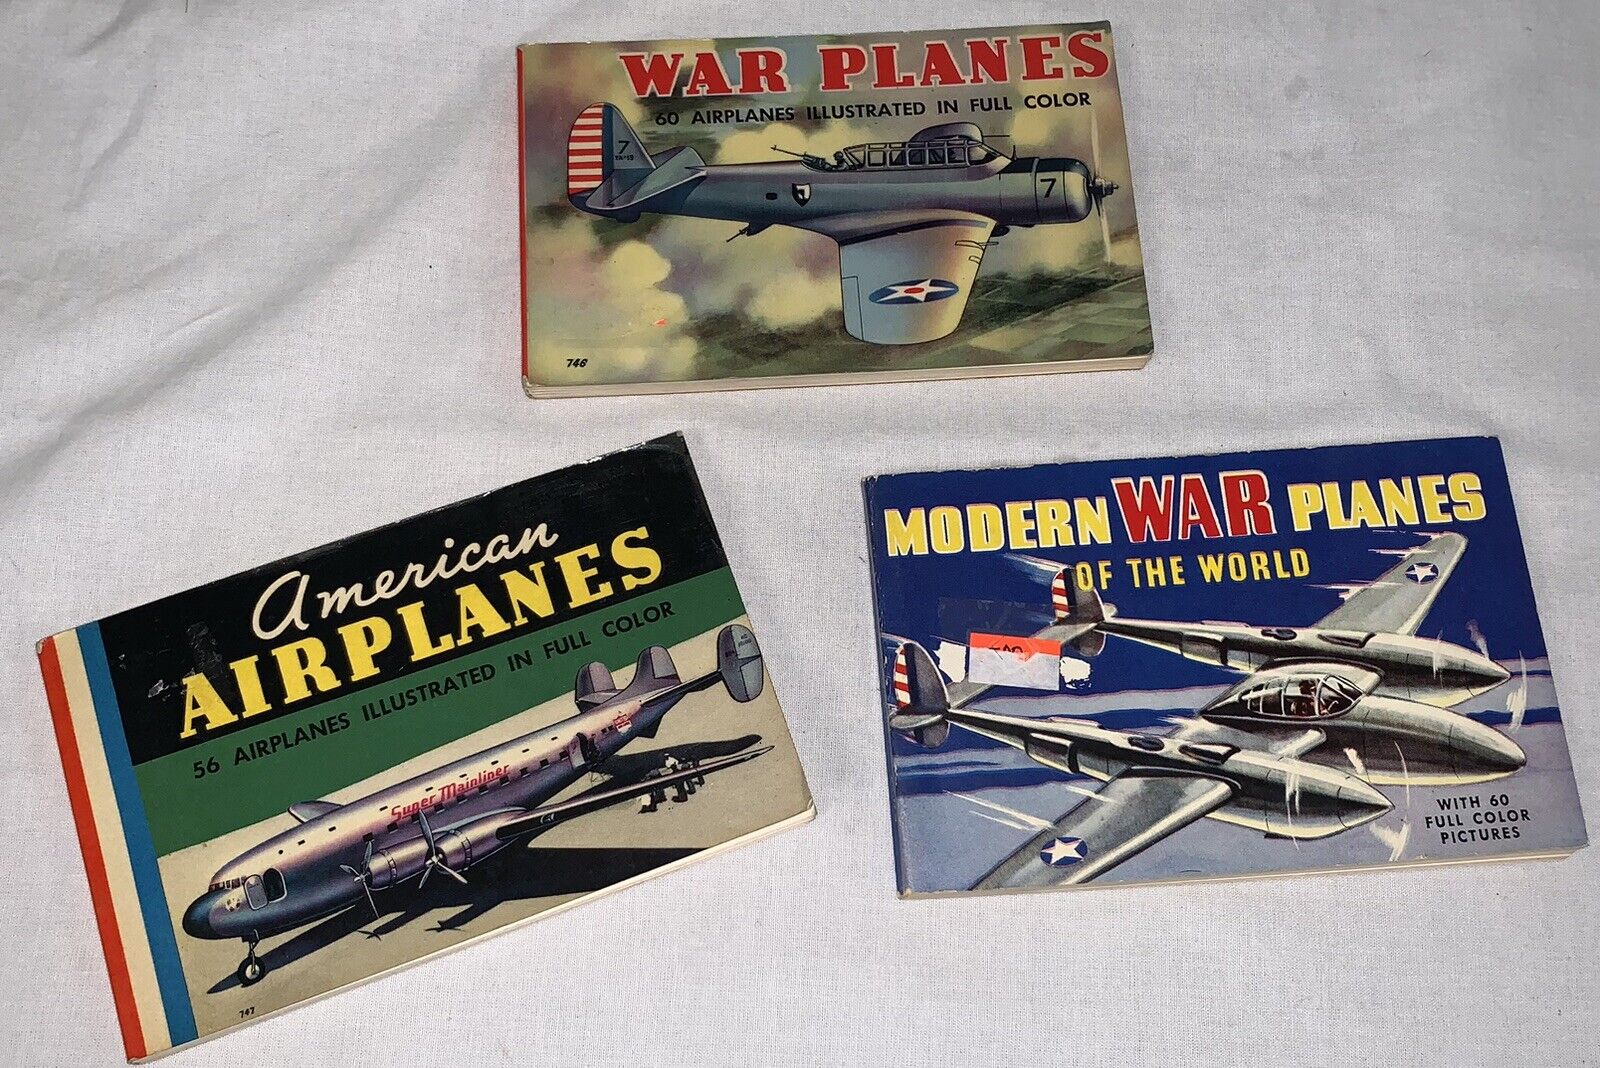 C8 3 1940s MODERN WAR PLANES OF THE WORLD NATIONS AMERICAN AIRPLANES JOHN WALKER